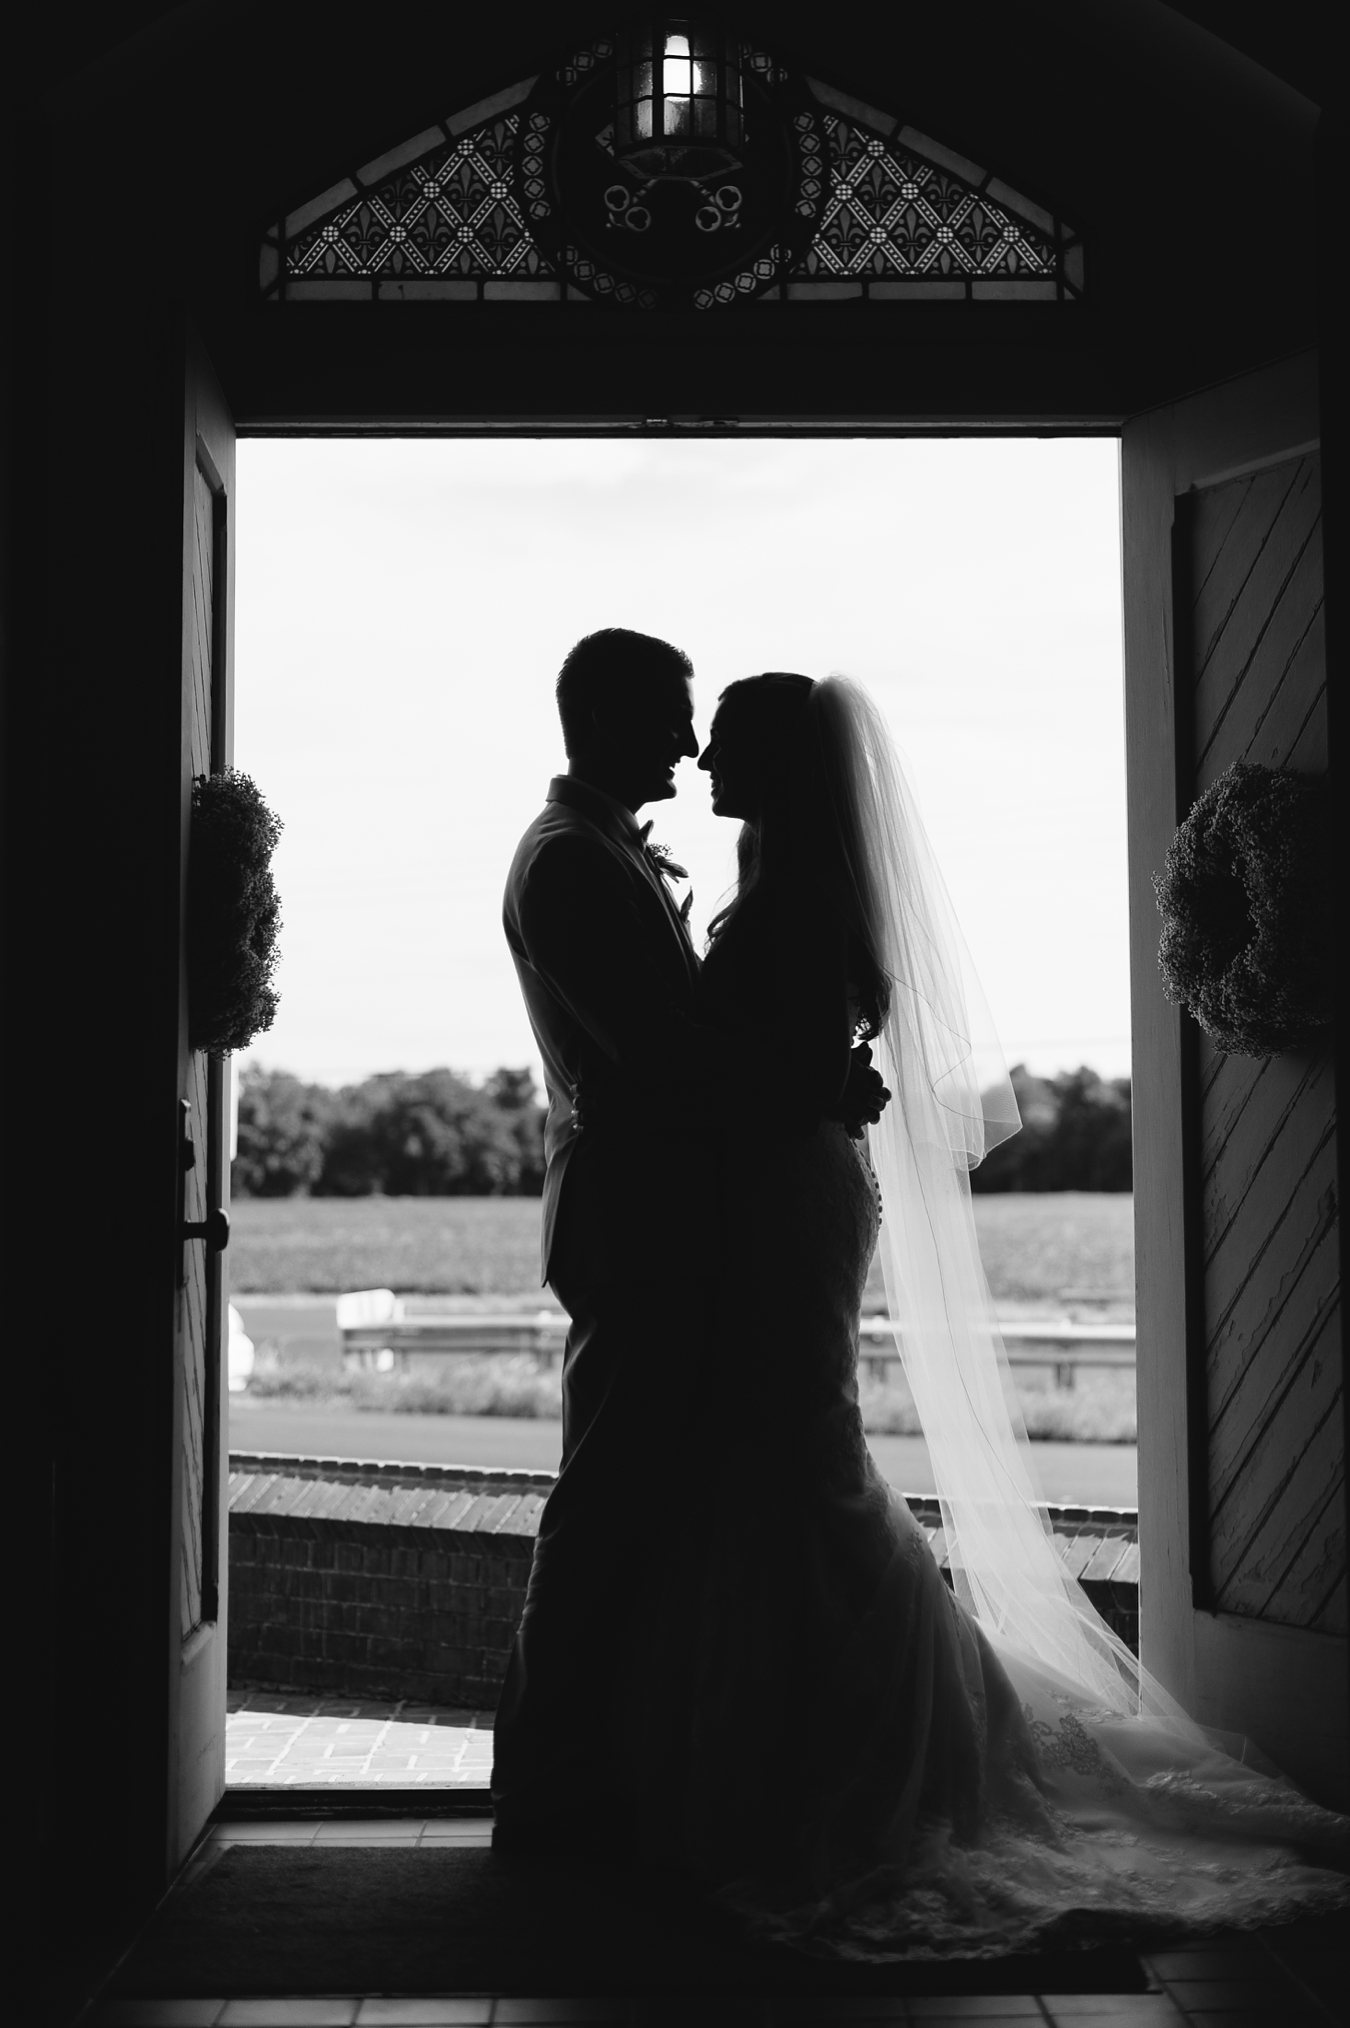 Wedding at St. Peter the Apostle Church in Queenstown, Maryland